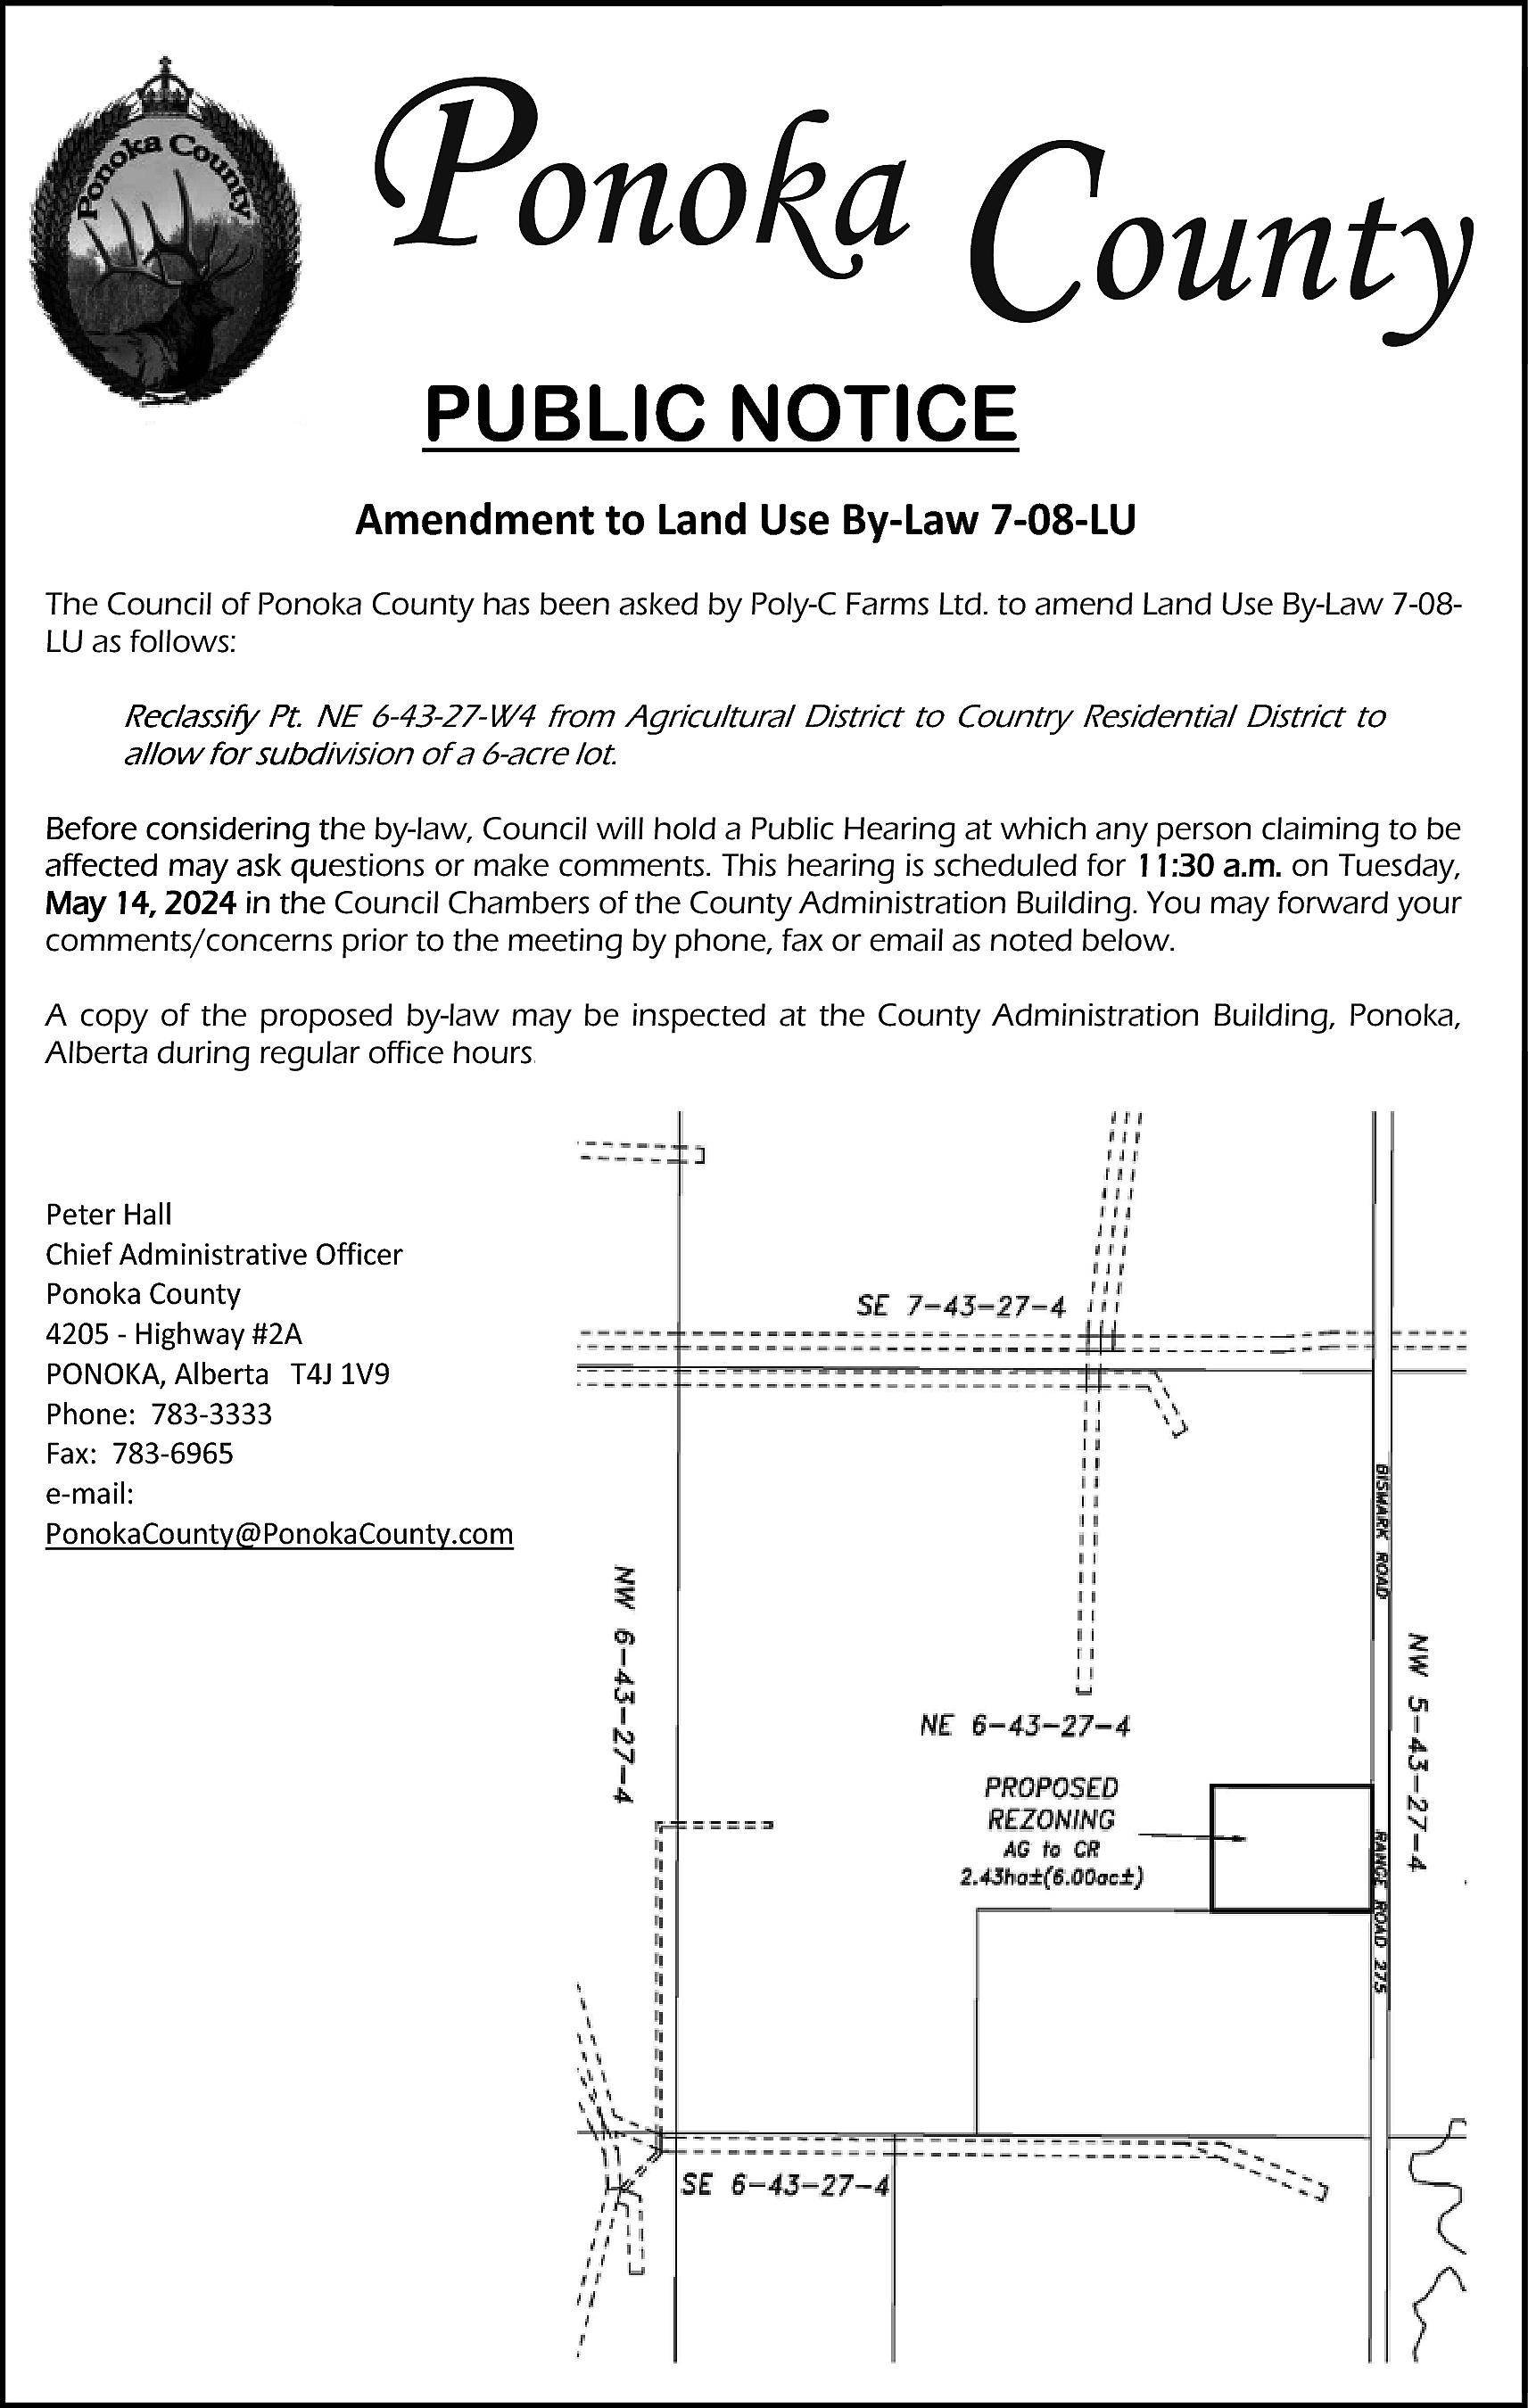 Ponoka County <br>PUBLIC NOTICE <br>  Ponoka County  PUBLIC NOTICE    Amendment to Land Use By-Law 7-08-LU  The Council of Ponoka County has been asked by Poly-C Farms Ltd. to amend Land Use By-Law 7-08LU as follows:    Reclassify Pt. NE 6-43-27-W4 from Agricultural District to Country Residential District to  allow for subdivision of a 6-acre lot.  Before considering the by-law, Council will hold a Public Hearing at which any person claiming to be  affected may ask questions or make comments. This hearing is scheduled for 11:30 a.m. on Tuesday,  May 14, 2024 in the Council Chambers of the County Administration Building. You may forward your  comments/concerns prior to the meeting by phone, fax or email as noted below.  A copy of the proposed by-law may be inspected at the County Administration Building, Ponoka,  Alberta during regular office hours.    Peter Hall  Chief Administrative Officer  Ponoka County  4205 - Highway #2A  PONOKA, Alberta T4J 1V9  Phone: 783-3333  Fax: 783-6965  e-mail:  PonokaCounty@PonokaCounty.com    